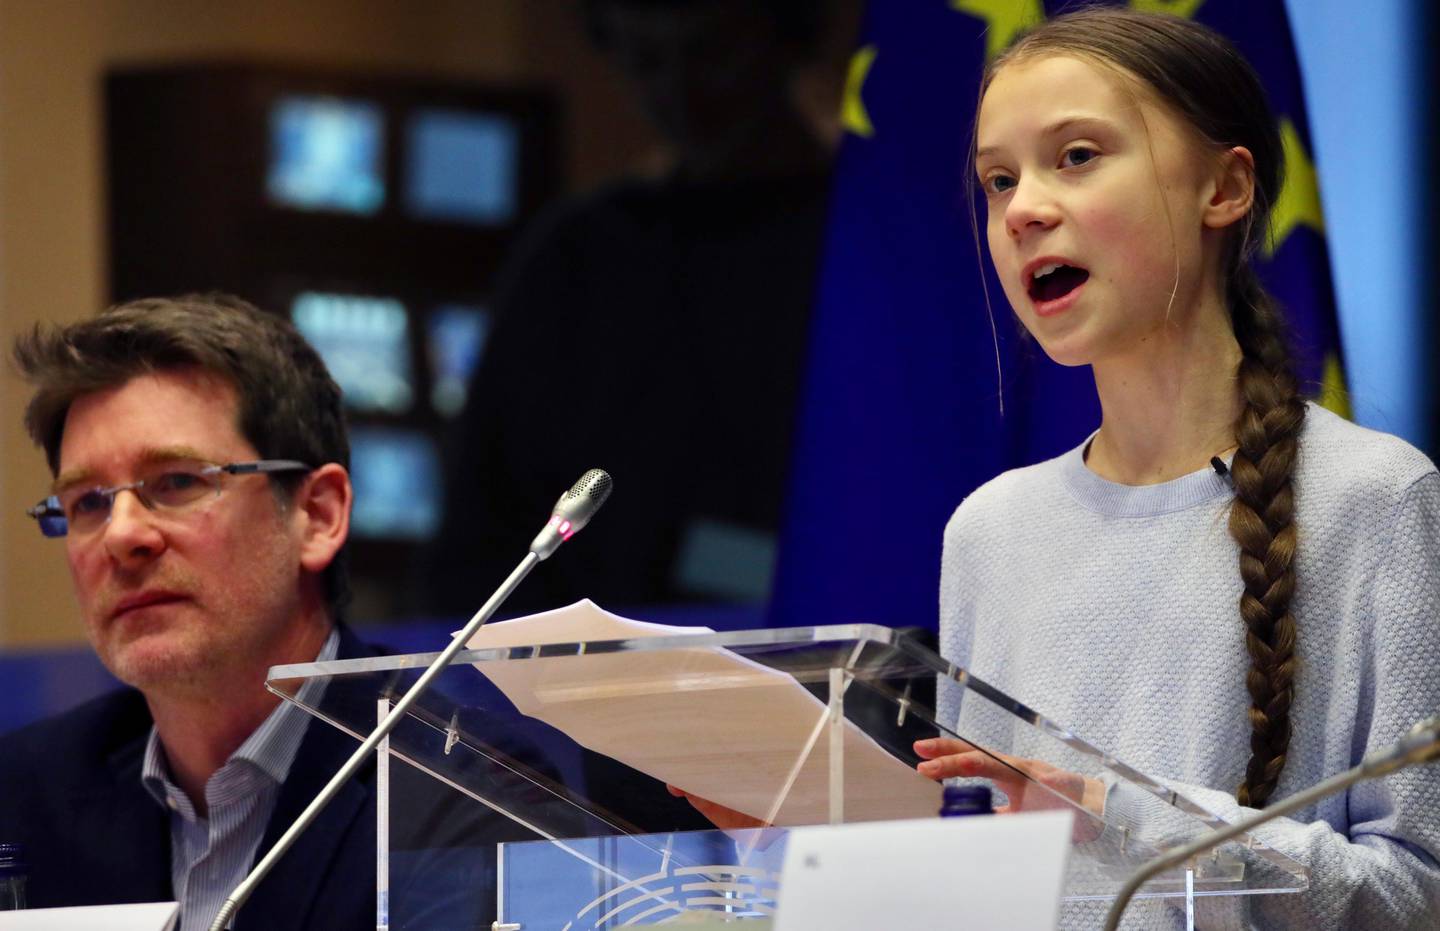 Swedish climate activist Greta Thunberg addresses a meeting of the Environment Council at the European Parliament in Brussels, Wednesday, March 4, 2020. Climate activists and Green members of the European Parliament are urging the European Union to be more ambitious as the bloc gets ready to unveil plans for a climate law to cut greenhouse gas emissions to zero by mid-century. (AP Photo/Olivier Matthys)